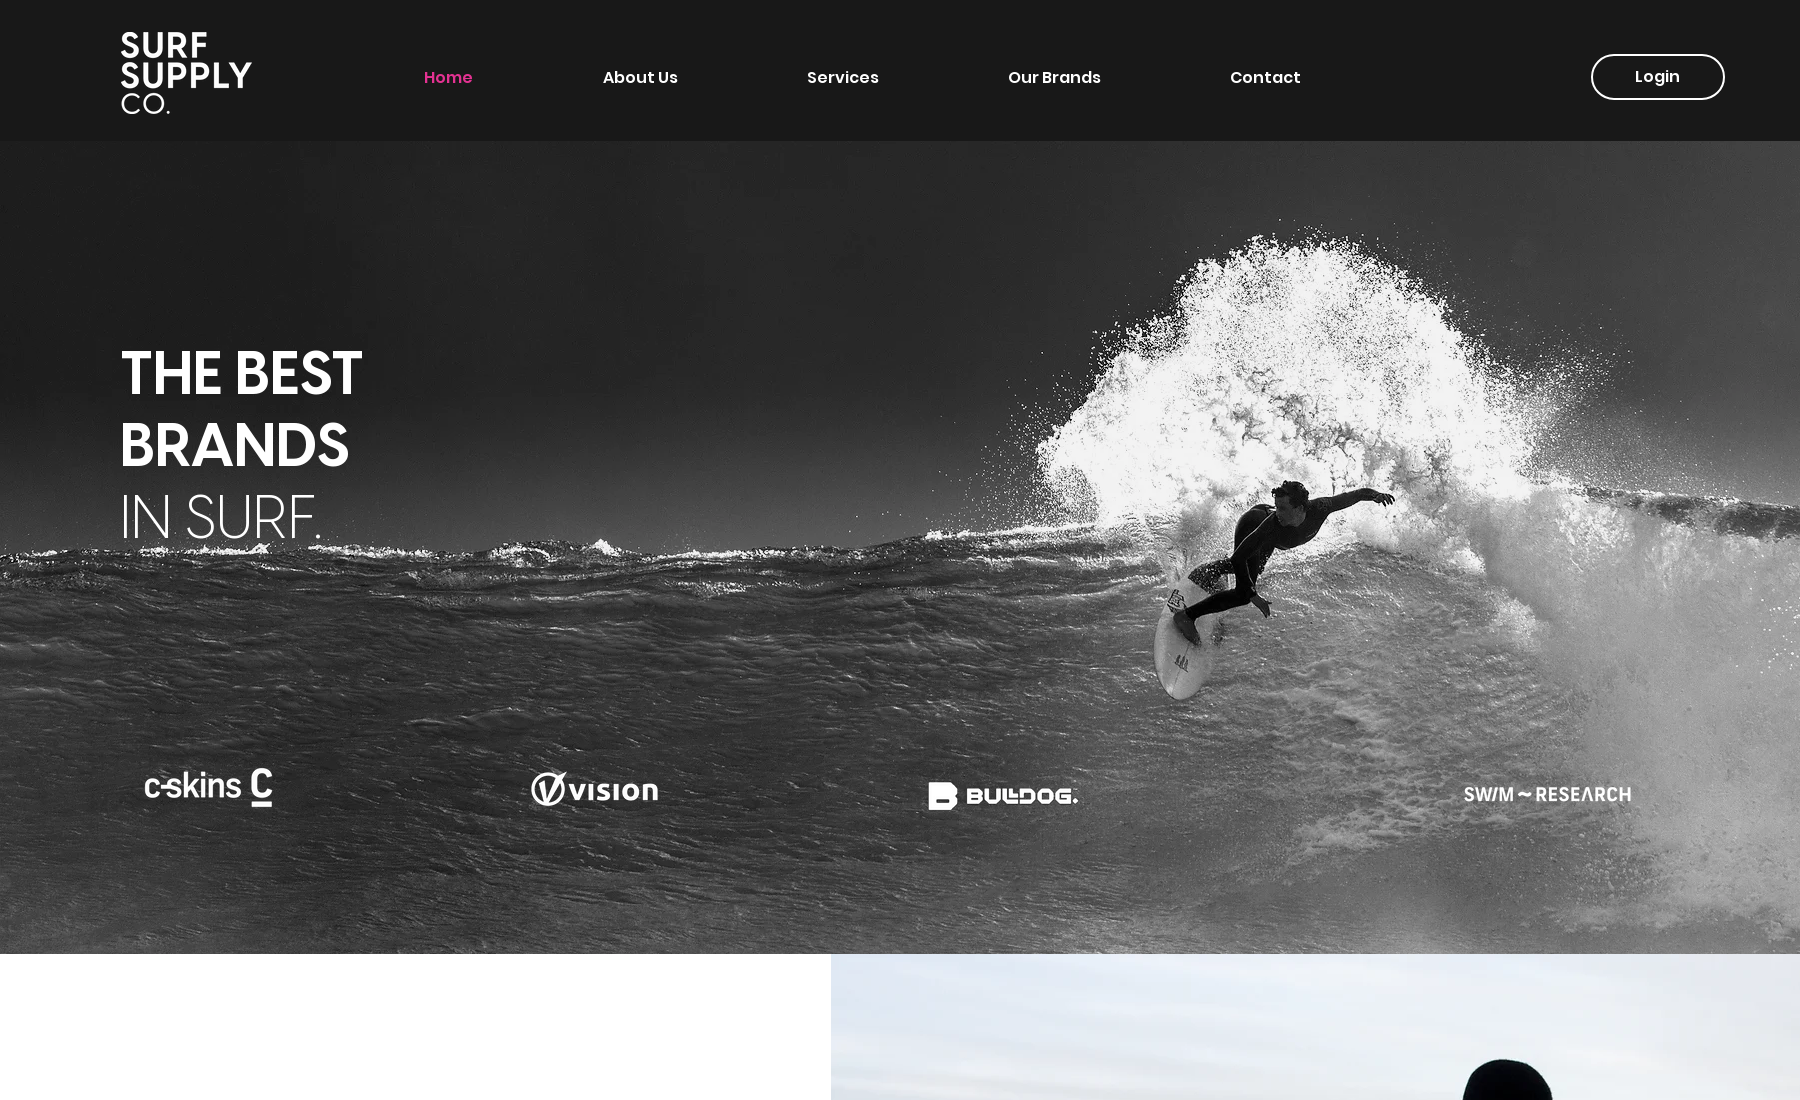 Surf Supply Co.: A website designed for Surf Supply Co. a distribution agency based in New Zealand that specialises in bringing water sport and surf brands to market in New Zealand.